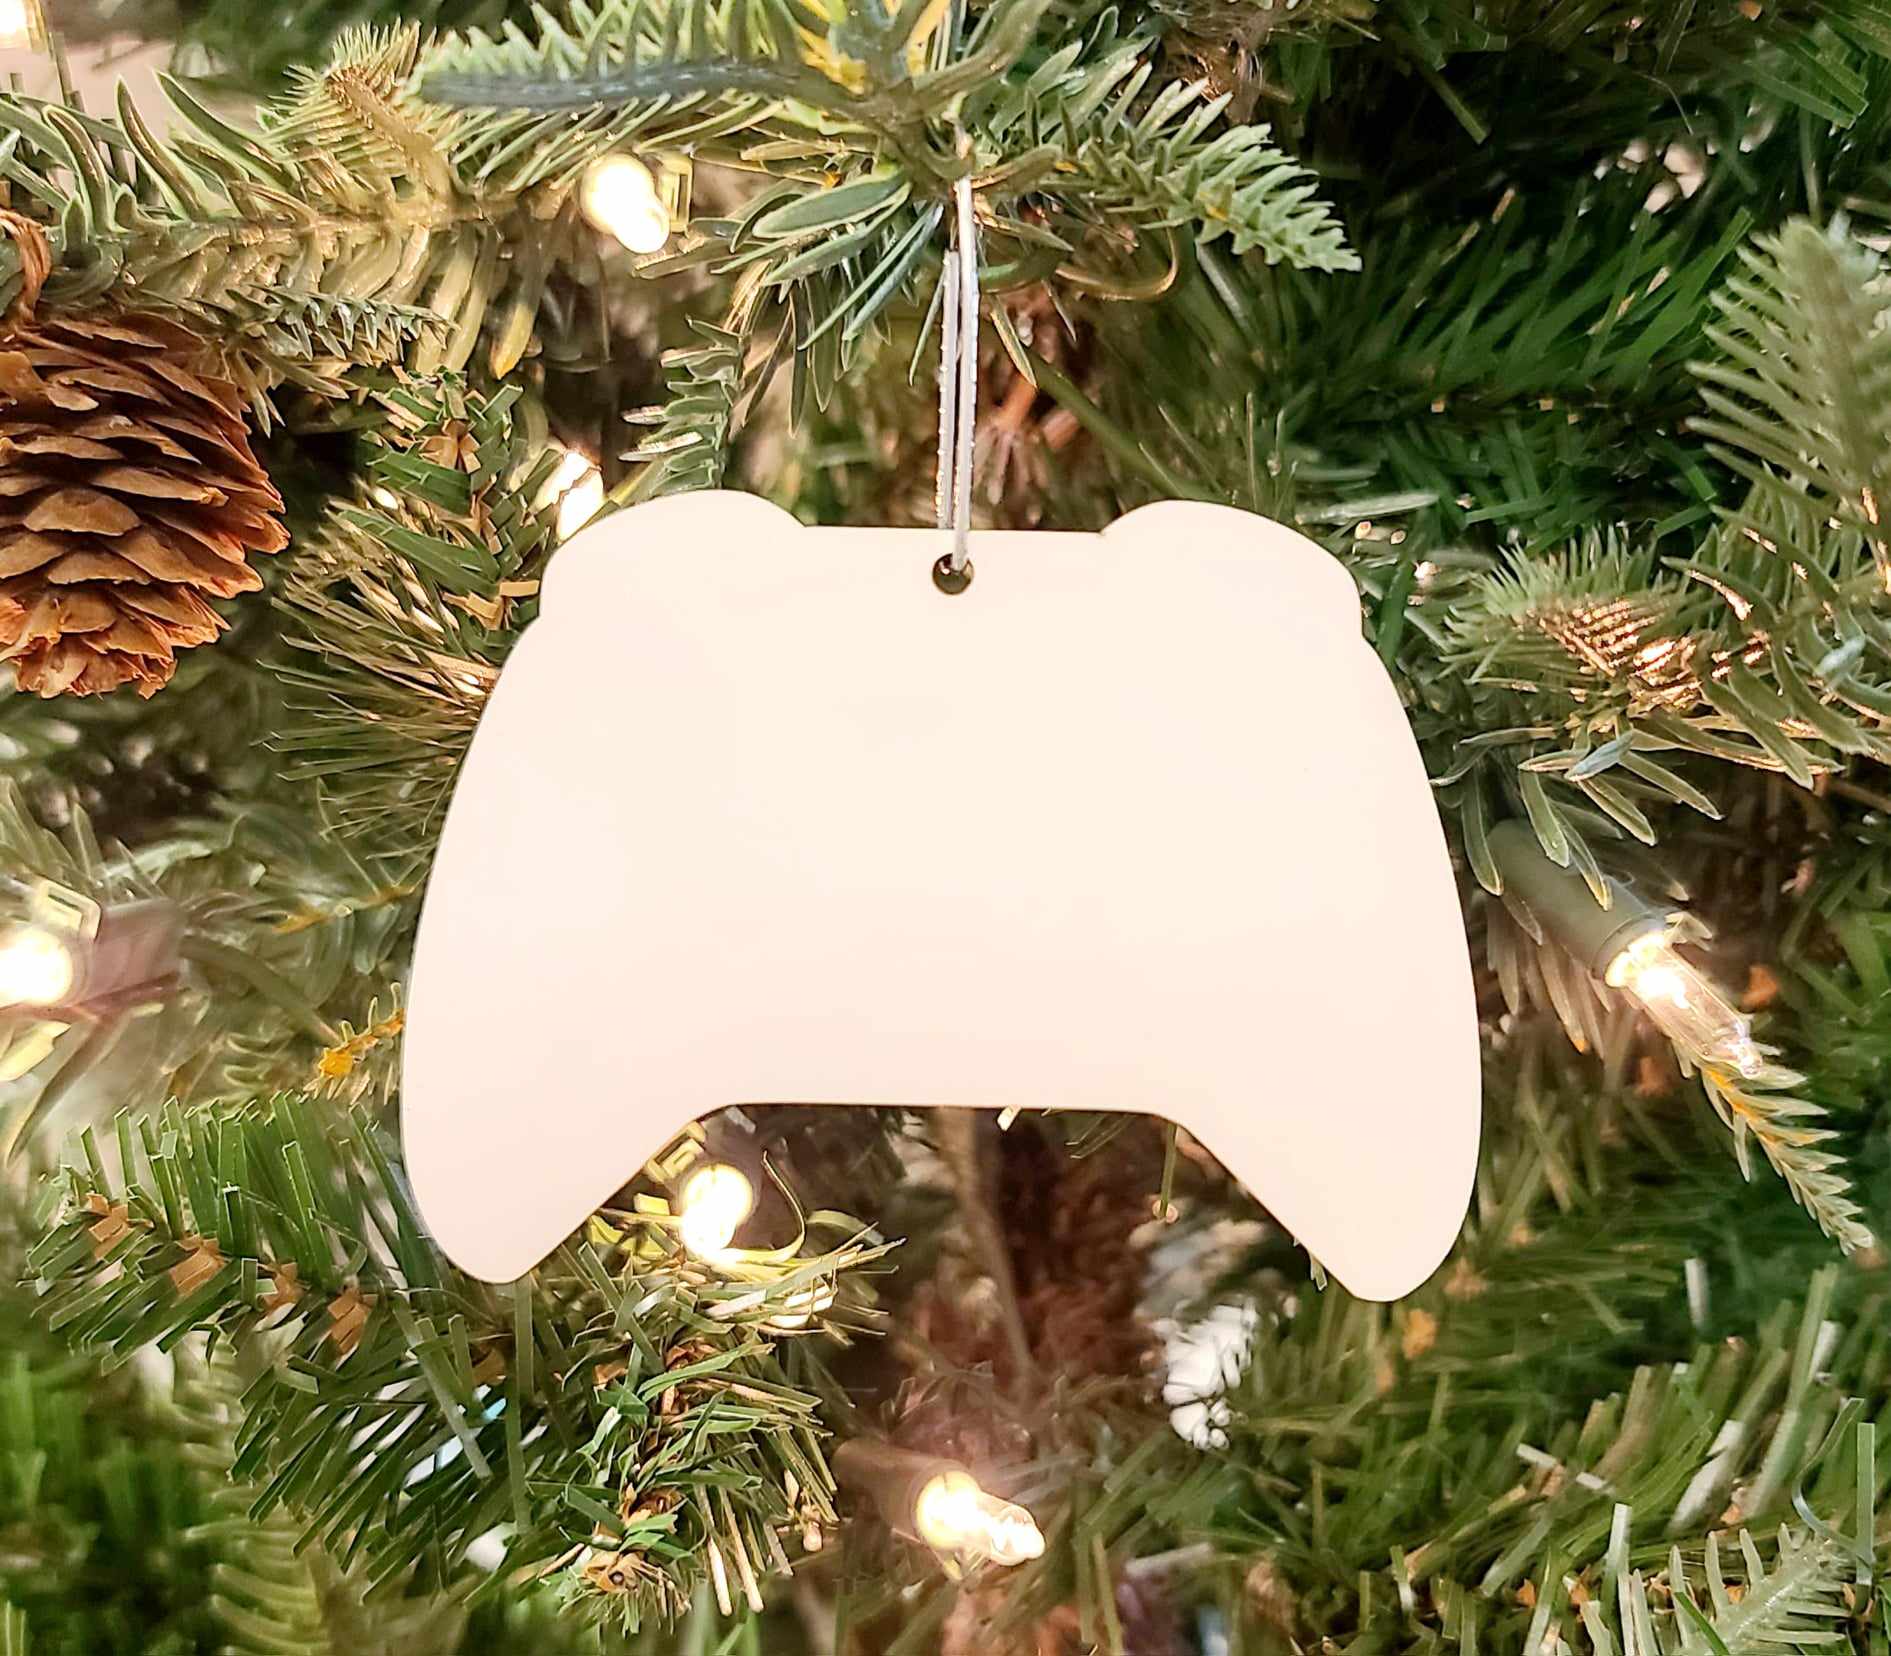 Game Controller Ornaments